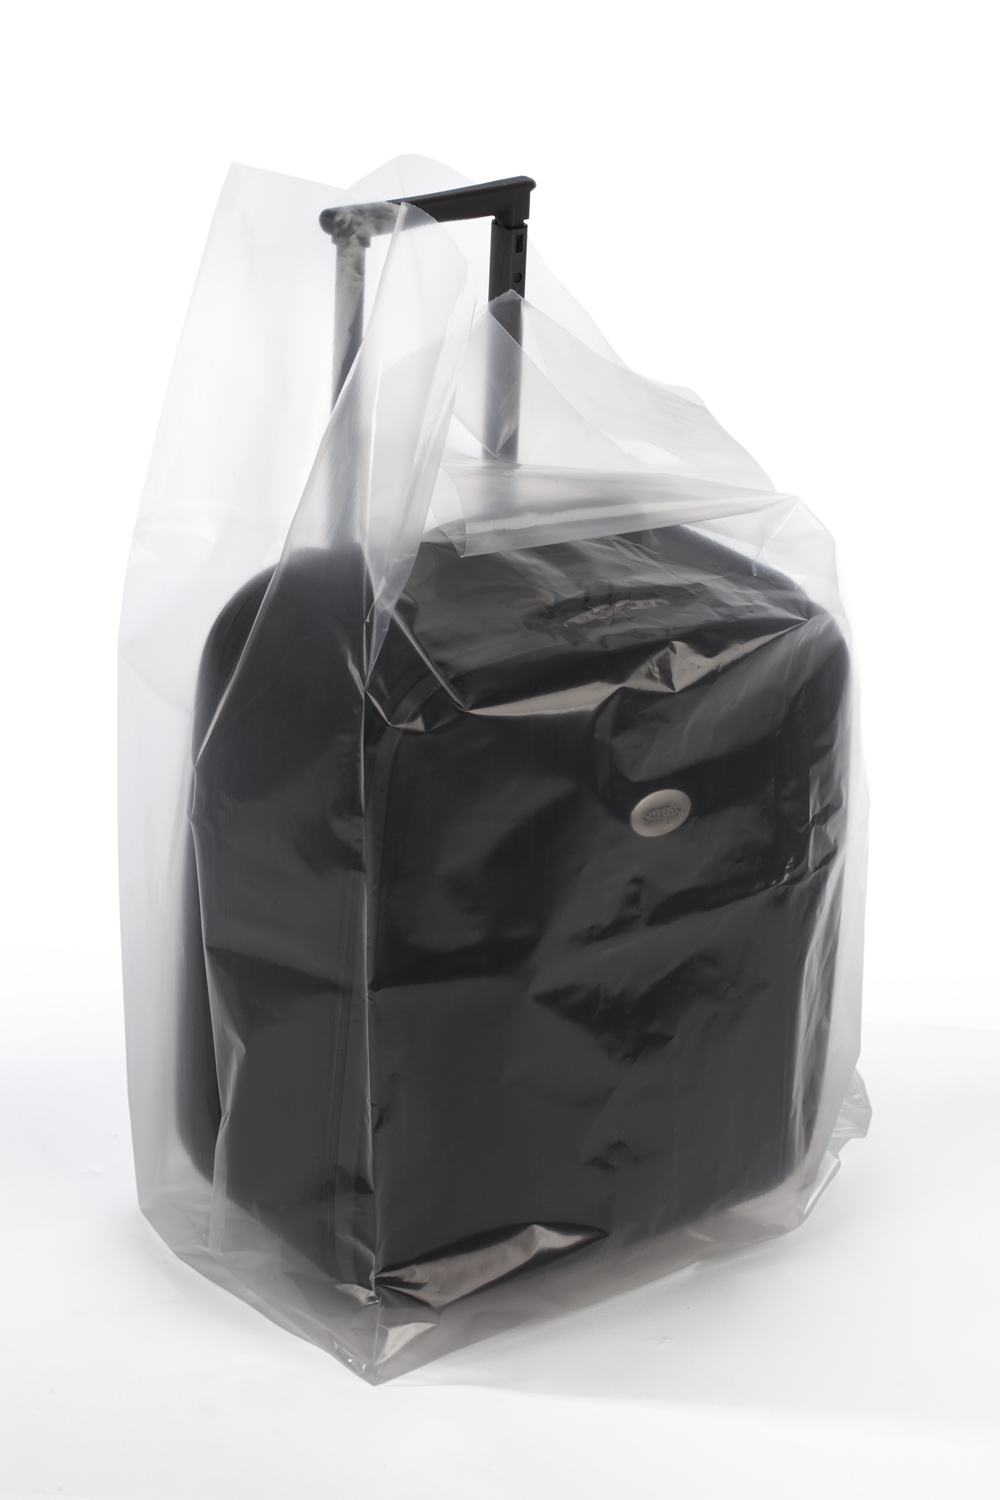 3 MIL Gusseted Poly Bags - 013-0103125 - 24